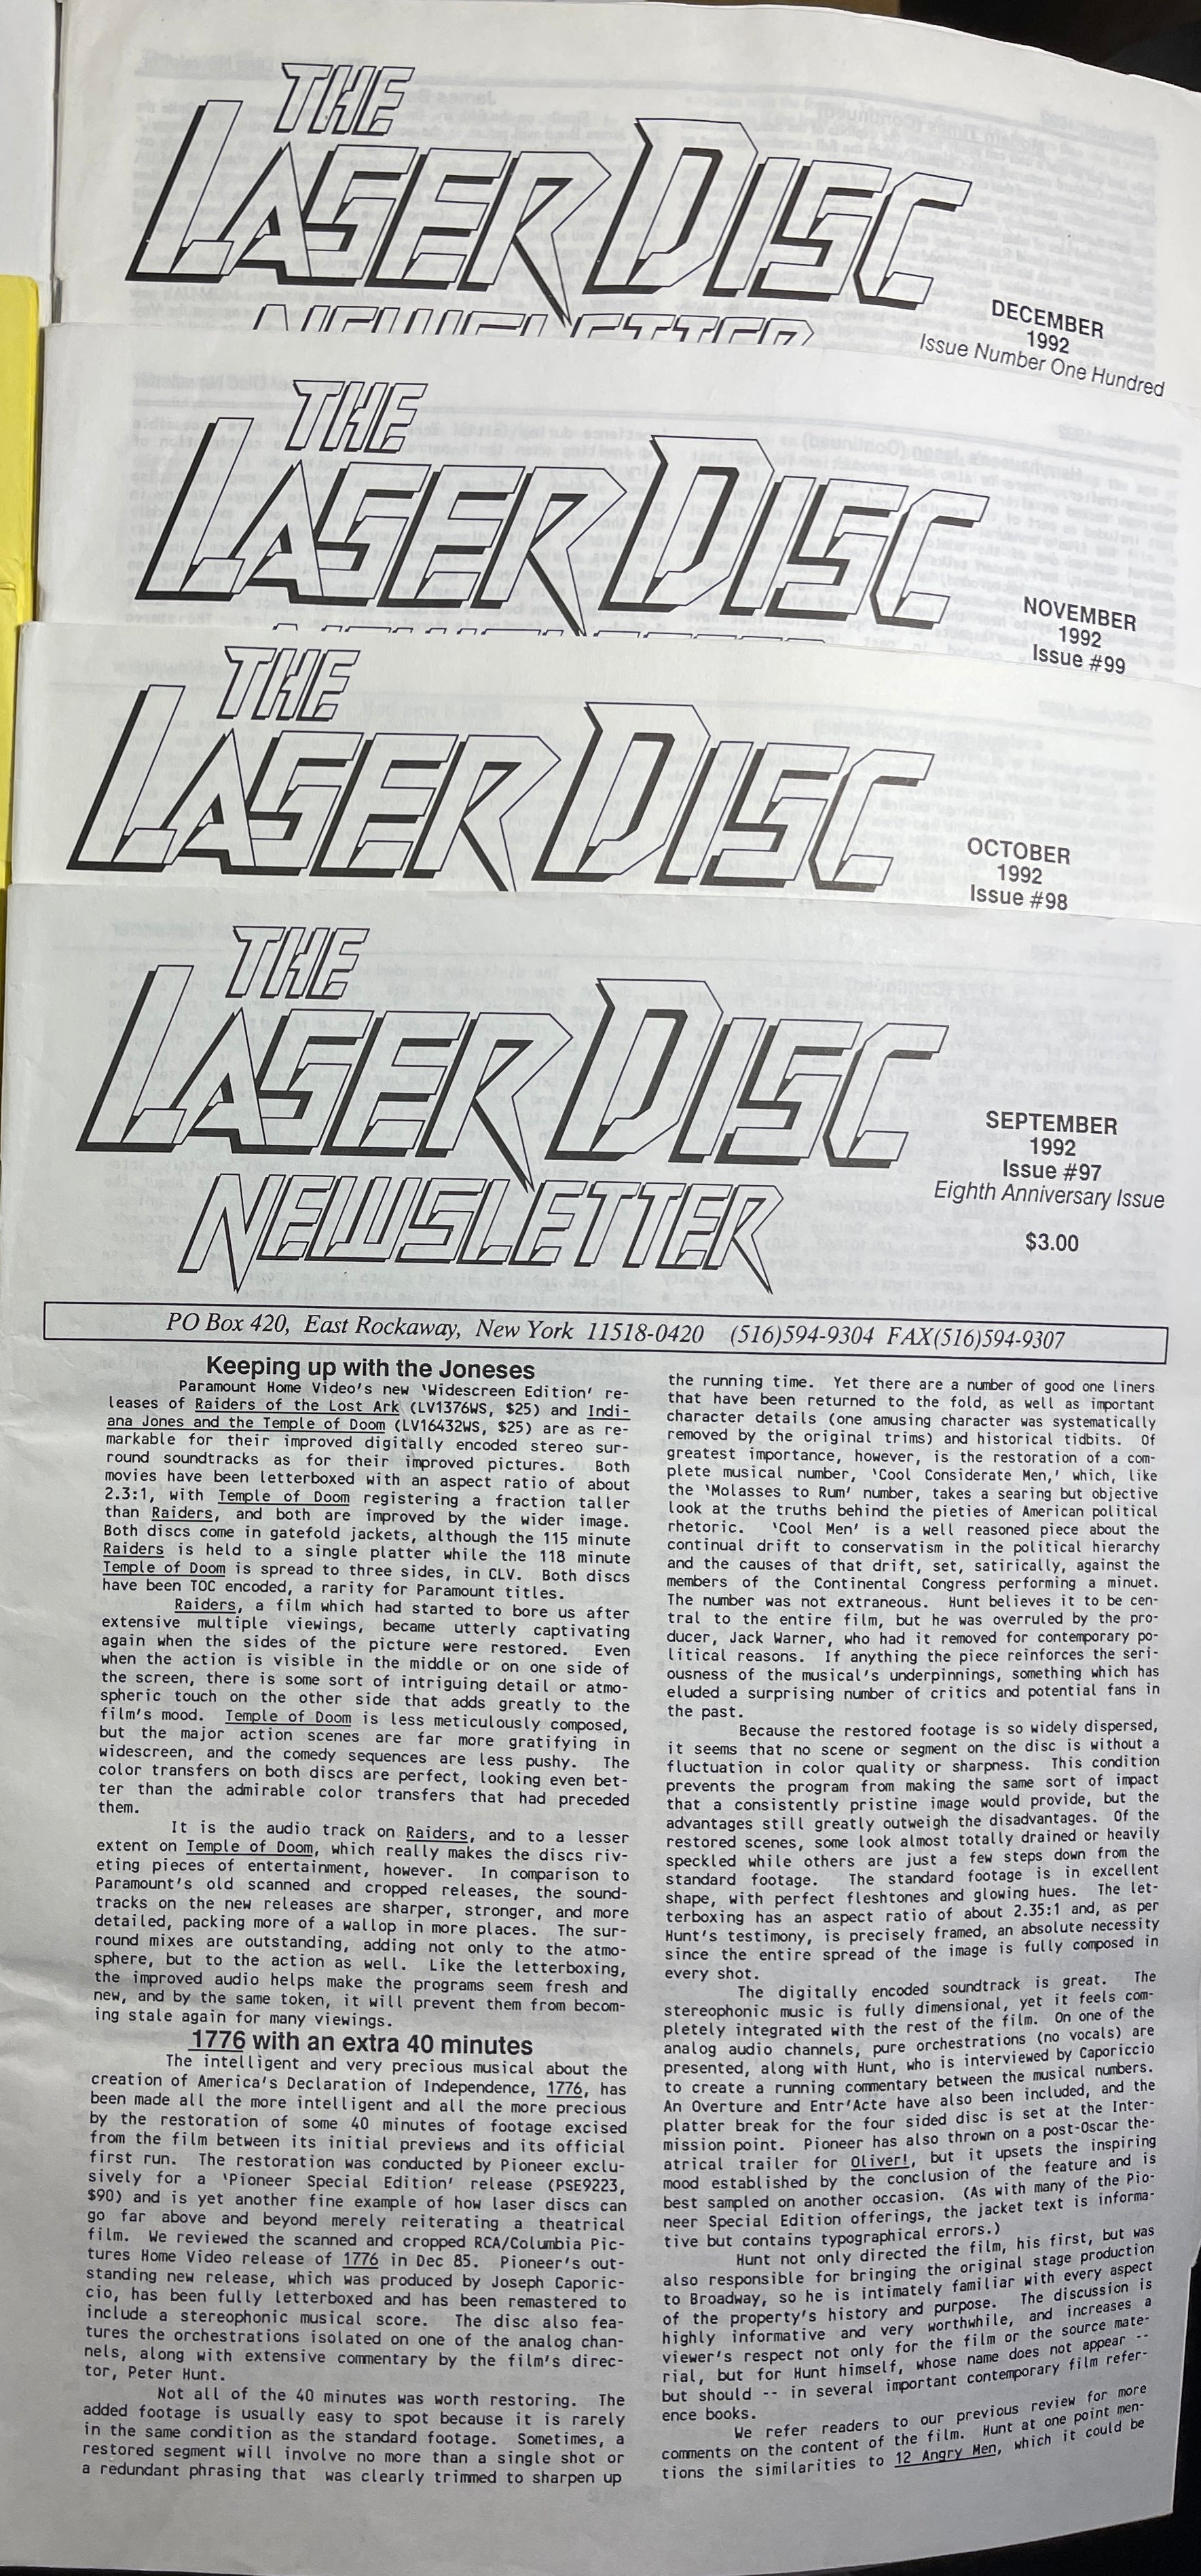 Laser Disc Newsletter - 1992 Complete Year - 12 Issues